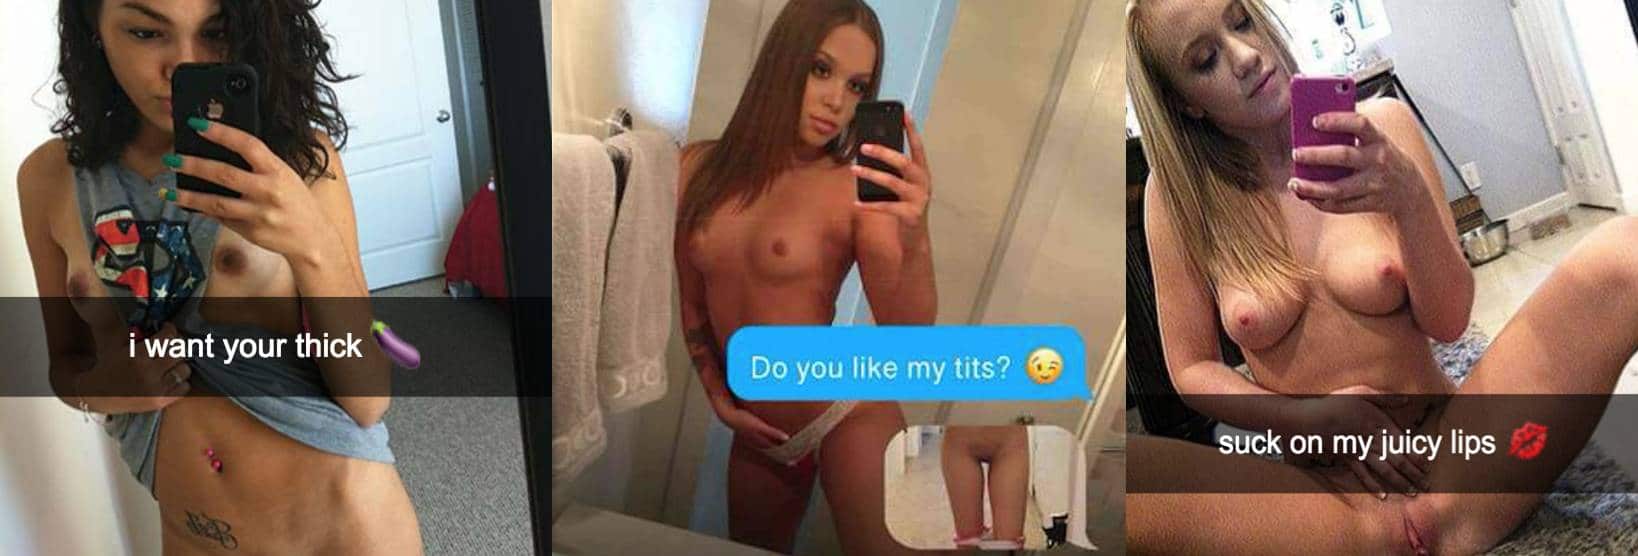 Www Horny Ourney Porn Tube Com - Top 10 Sexting Online Websites & Apps For Horny Singles